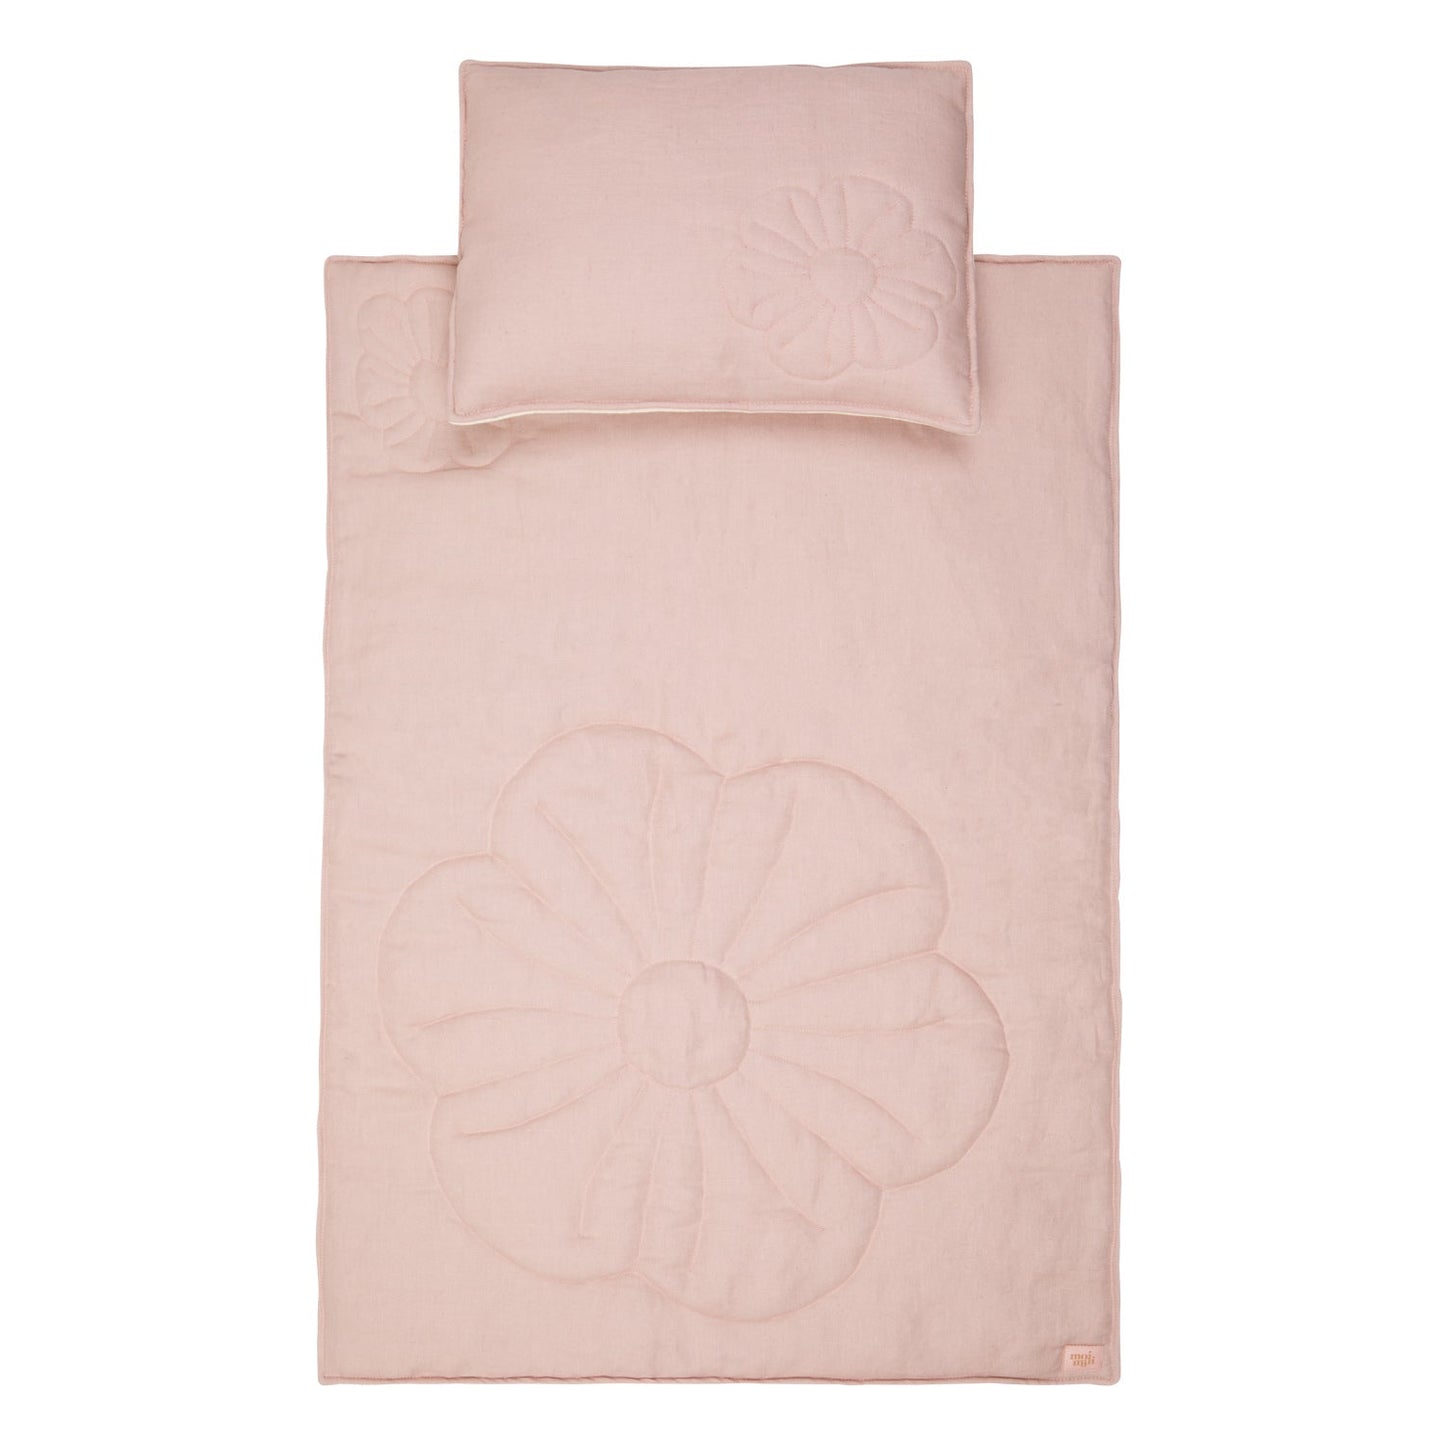 Linen "Powder Pink" Flower Child Cover Set by Moi Mili